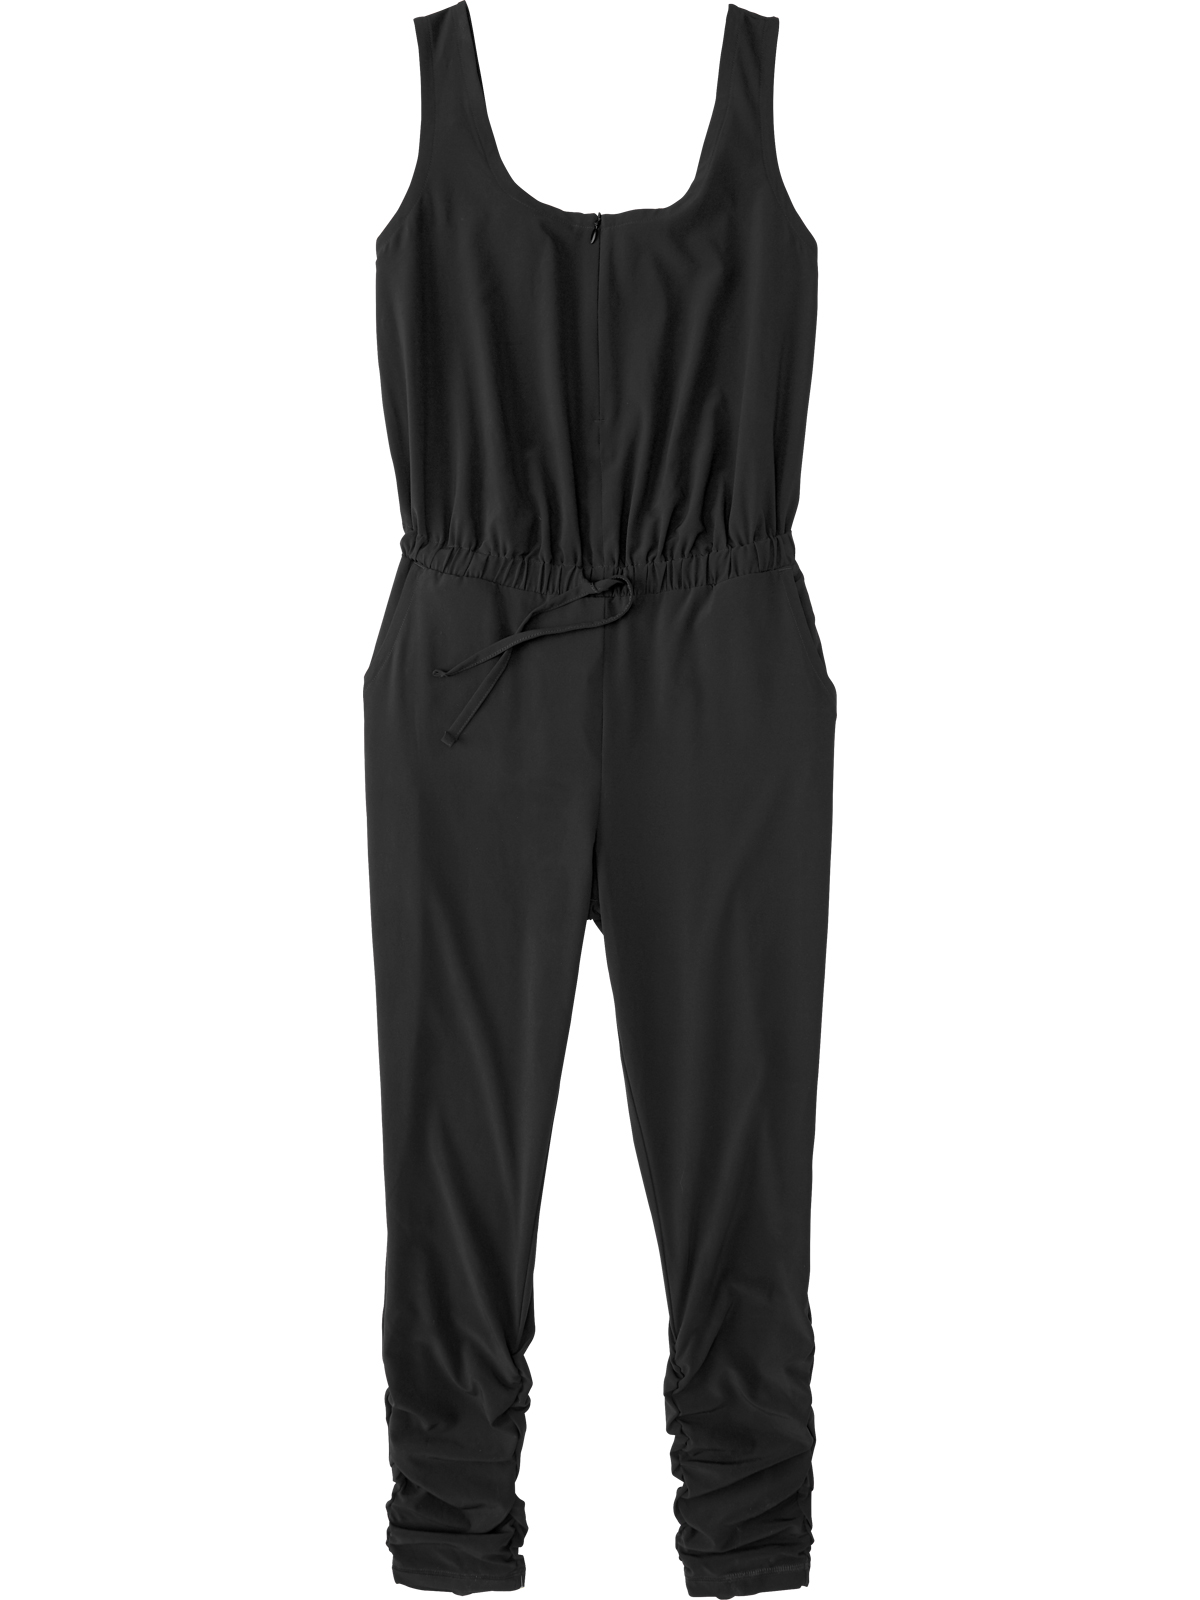 Women's Jumpsuits and Rompers | Title Nine